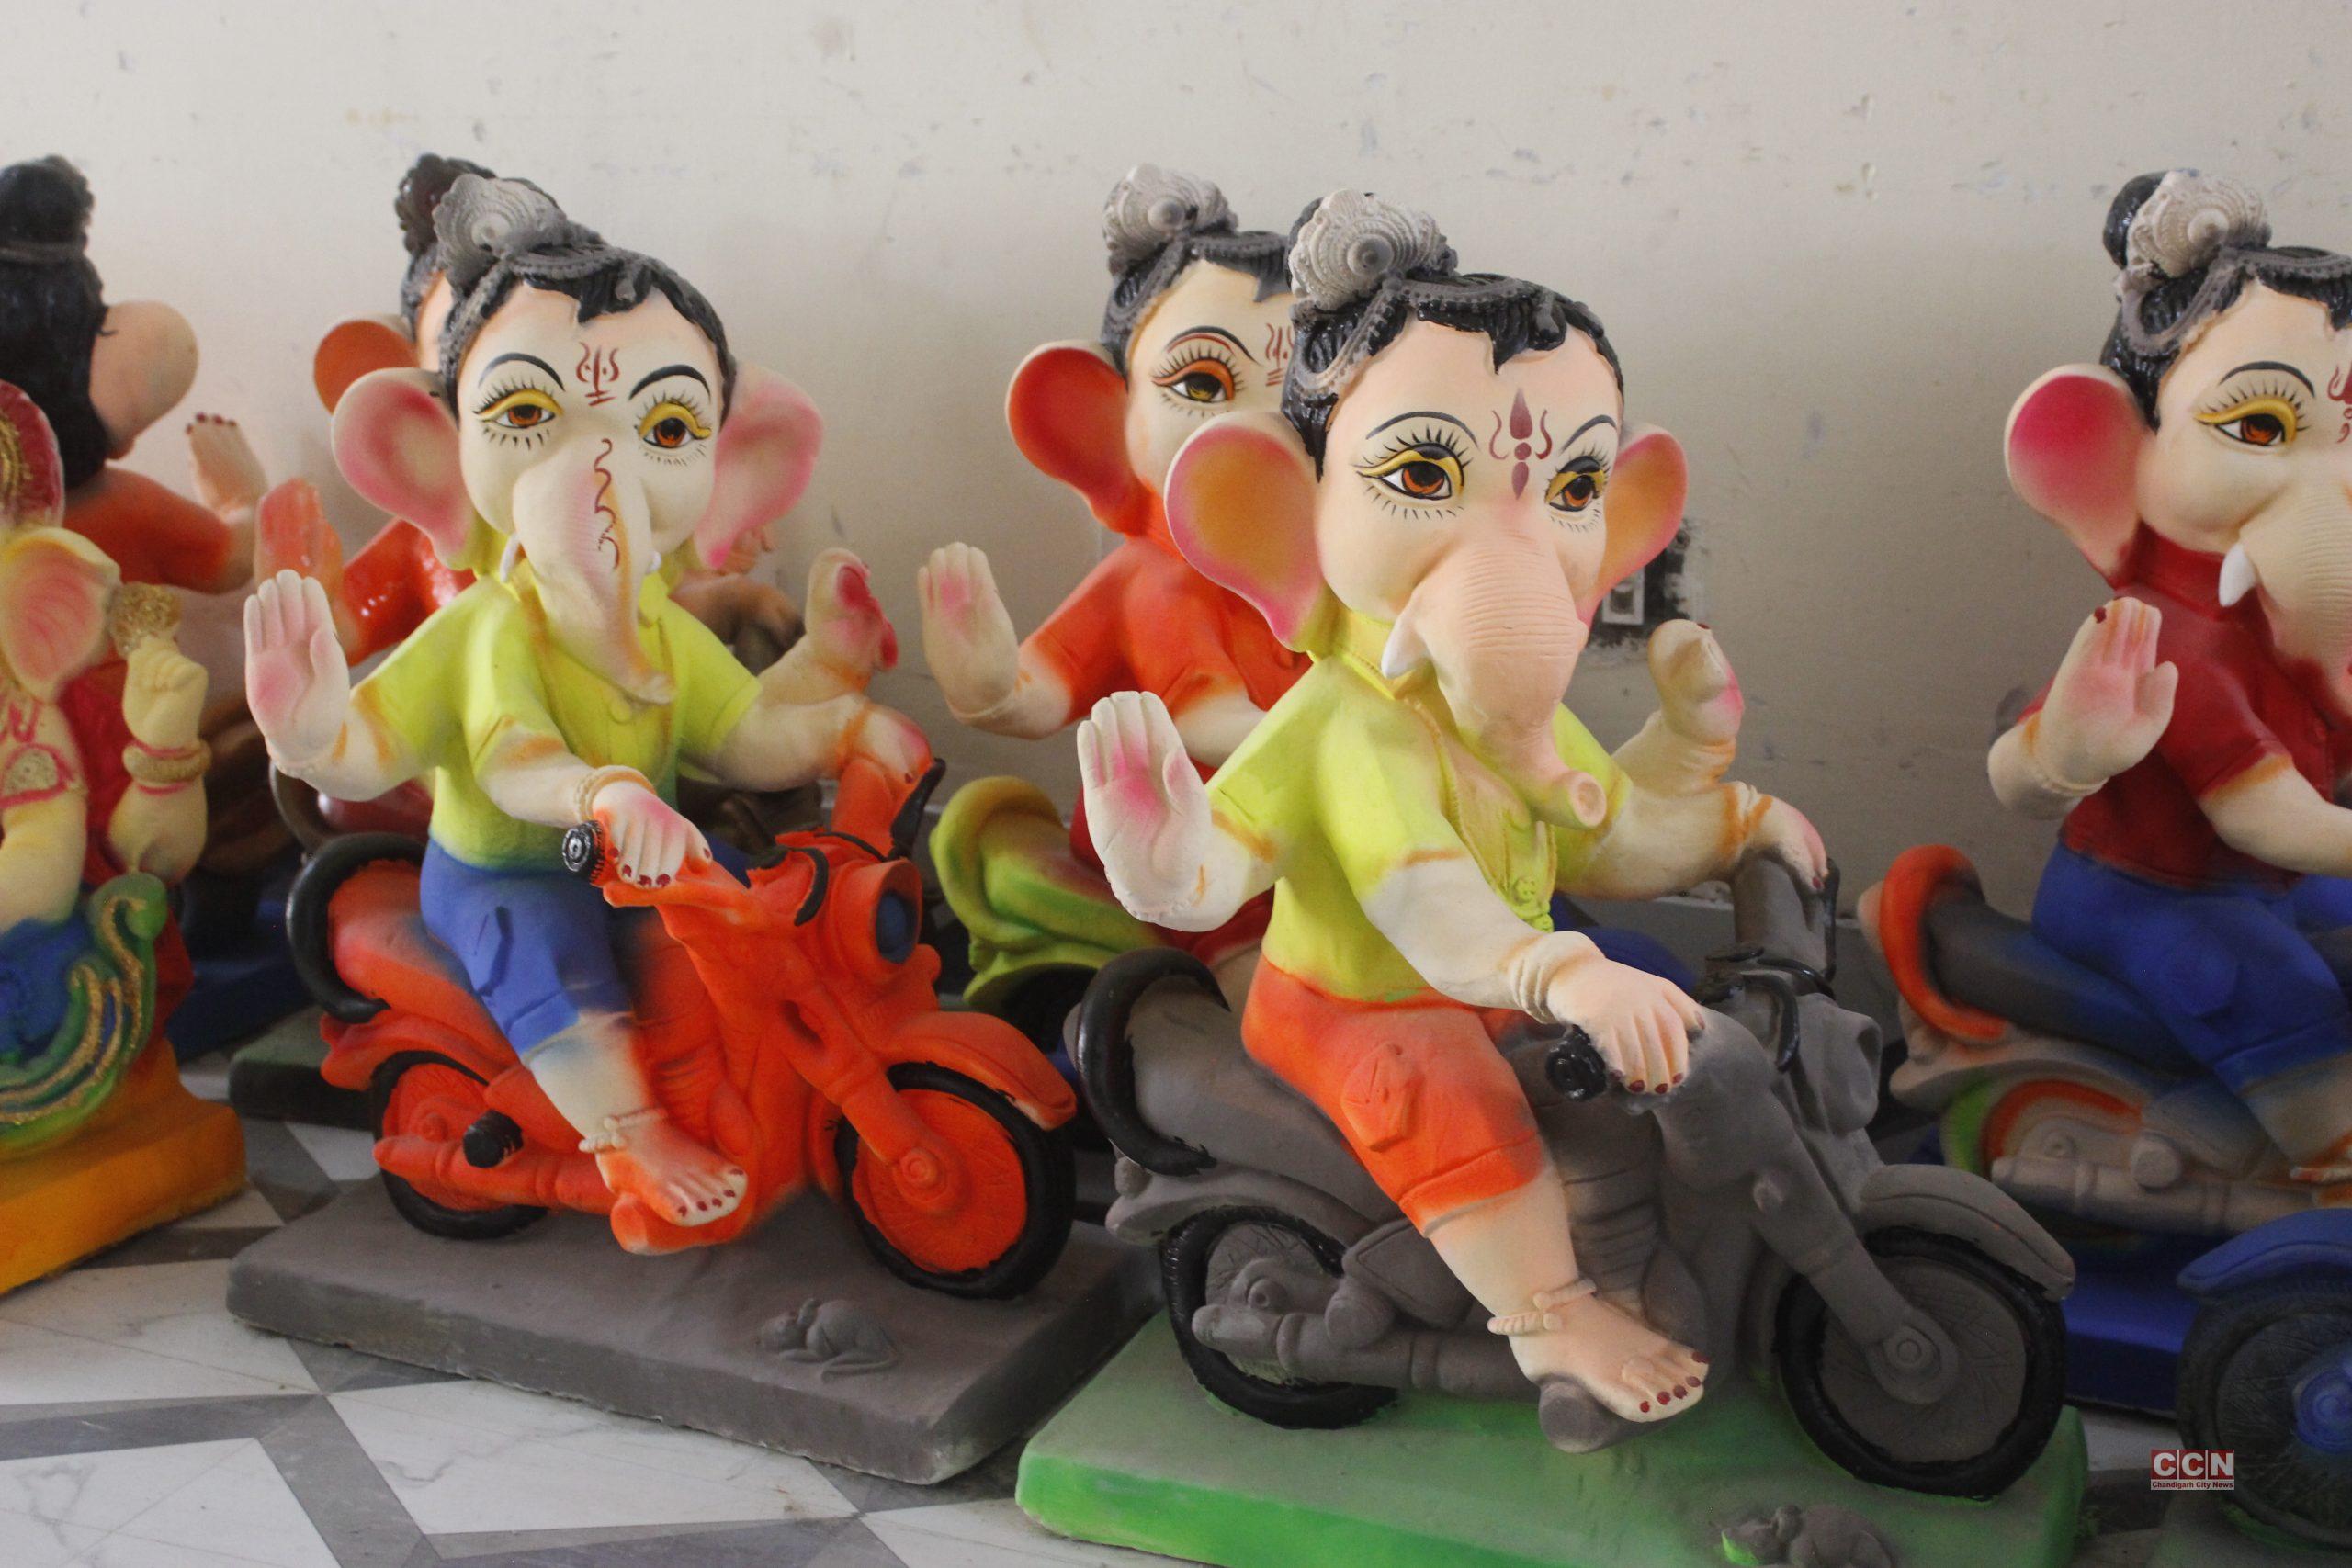 Special Idols of Ganpati made by skilled artisans from Rajasthan attracting devotees